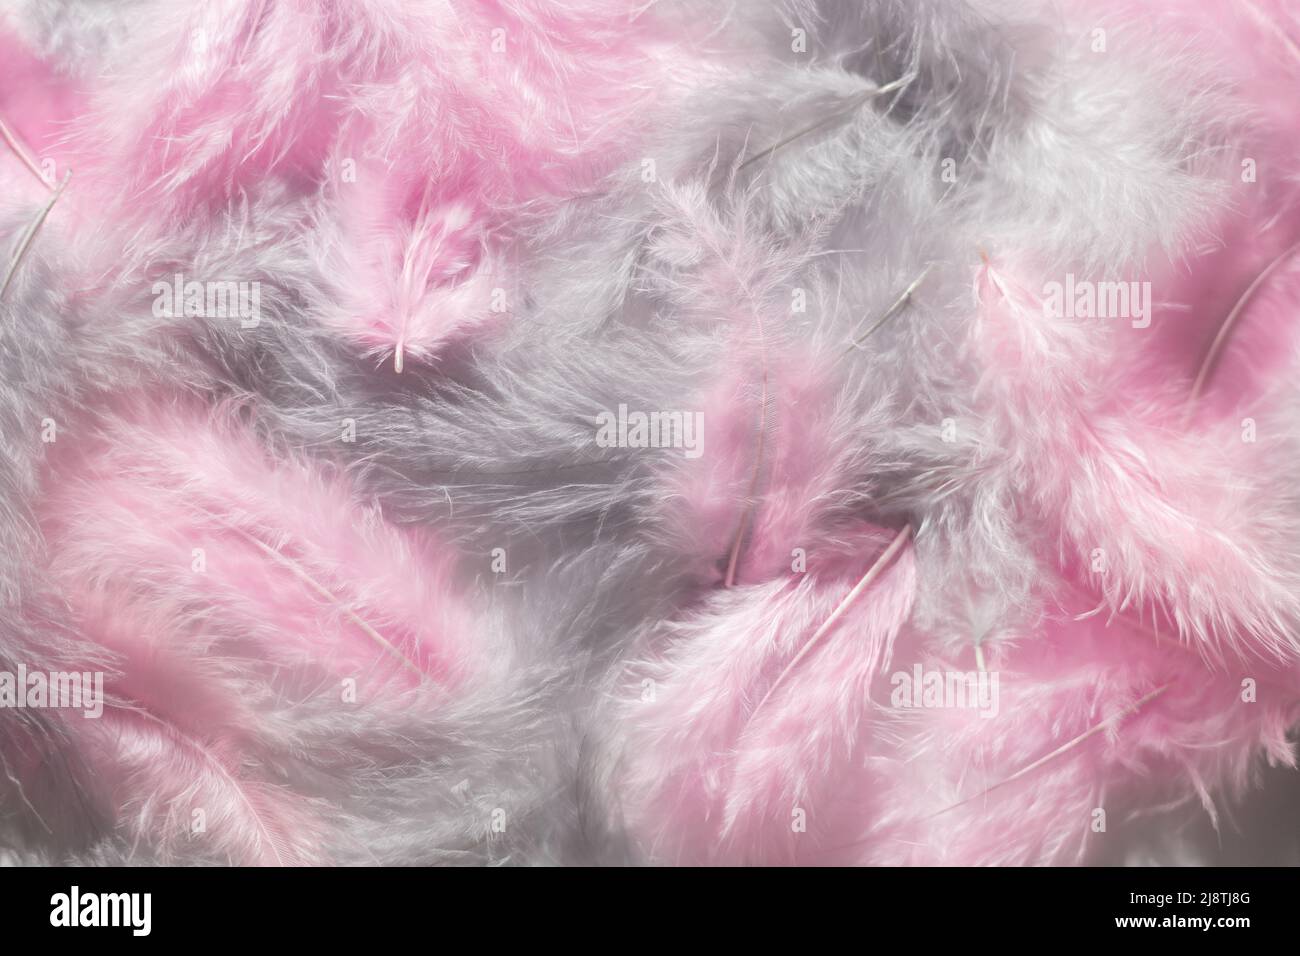 Pink and gray feathers background Stock Photo